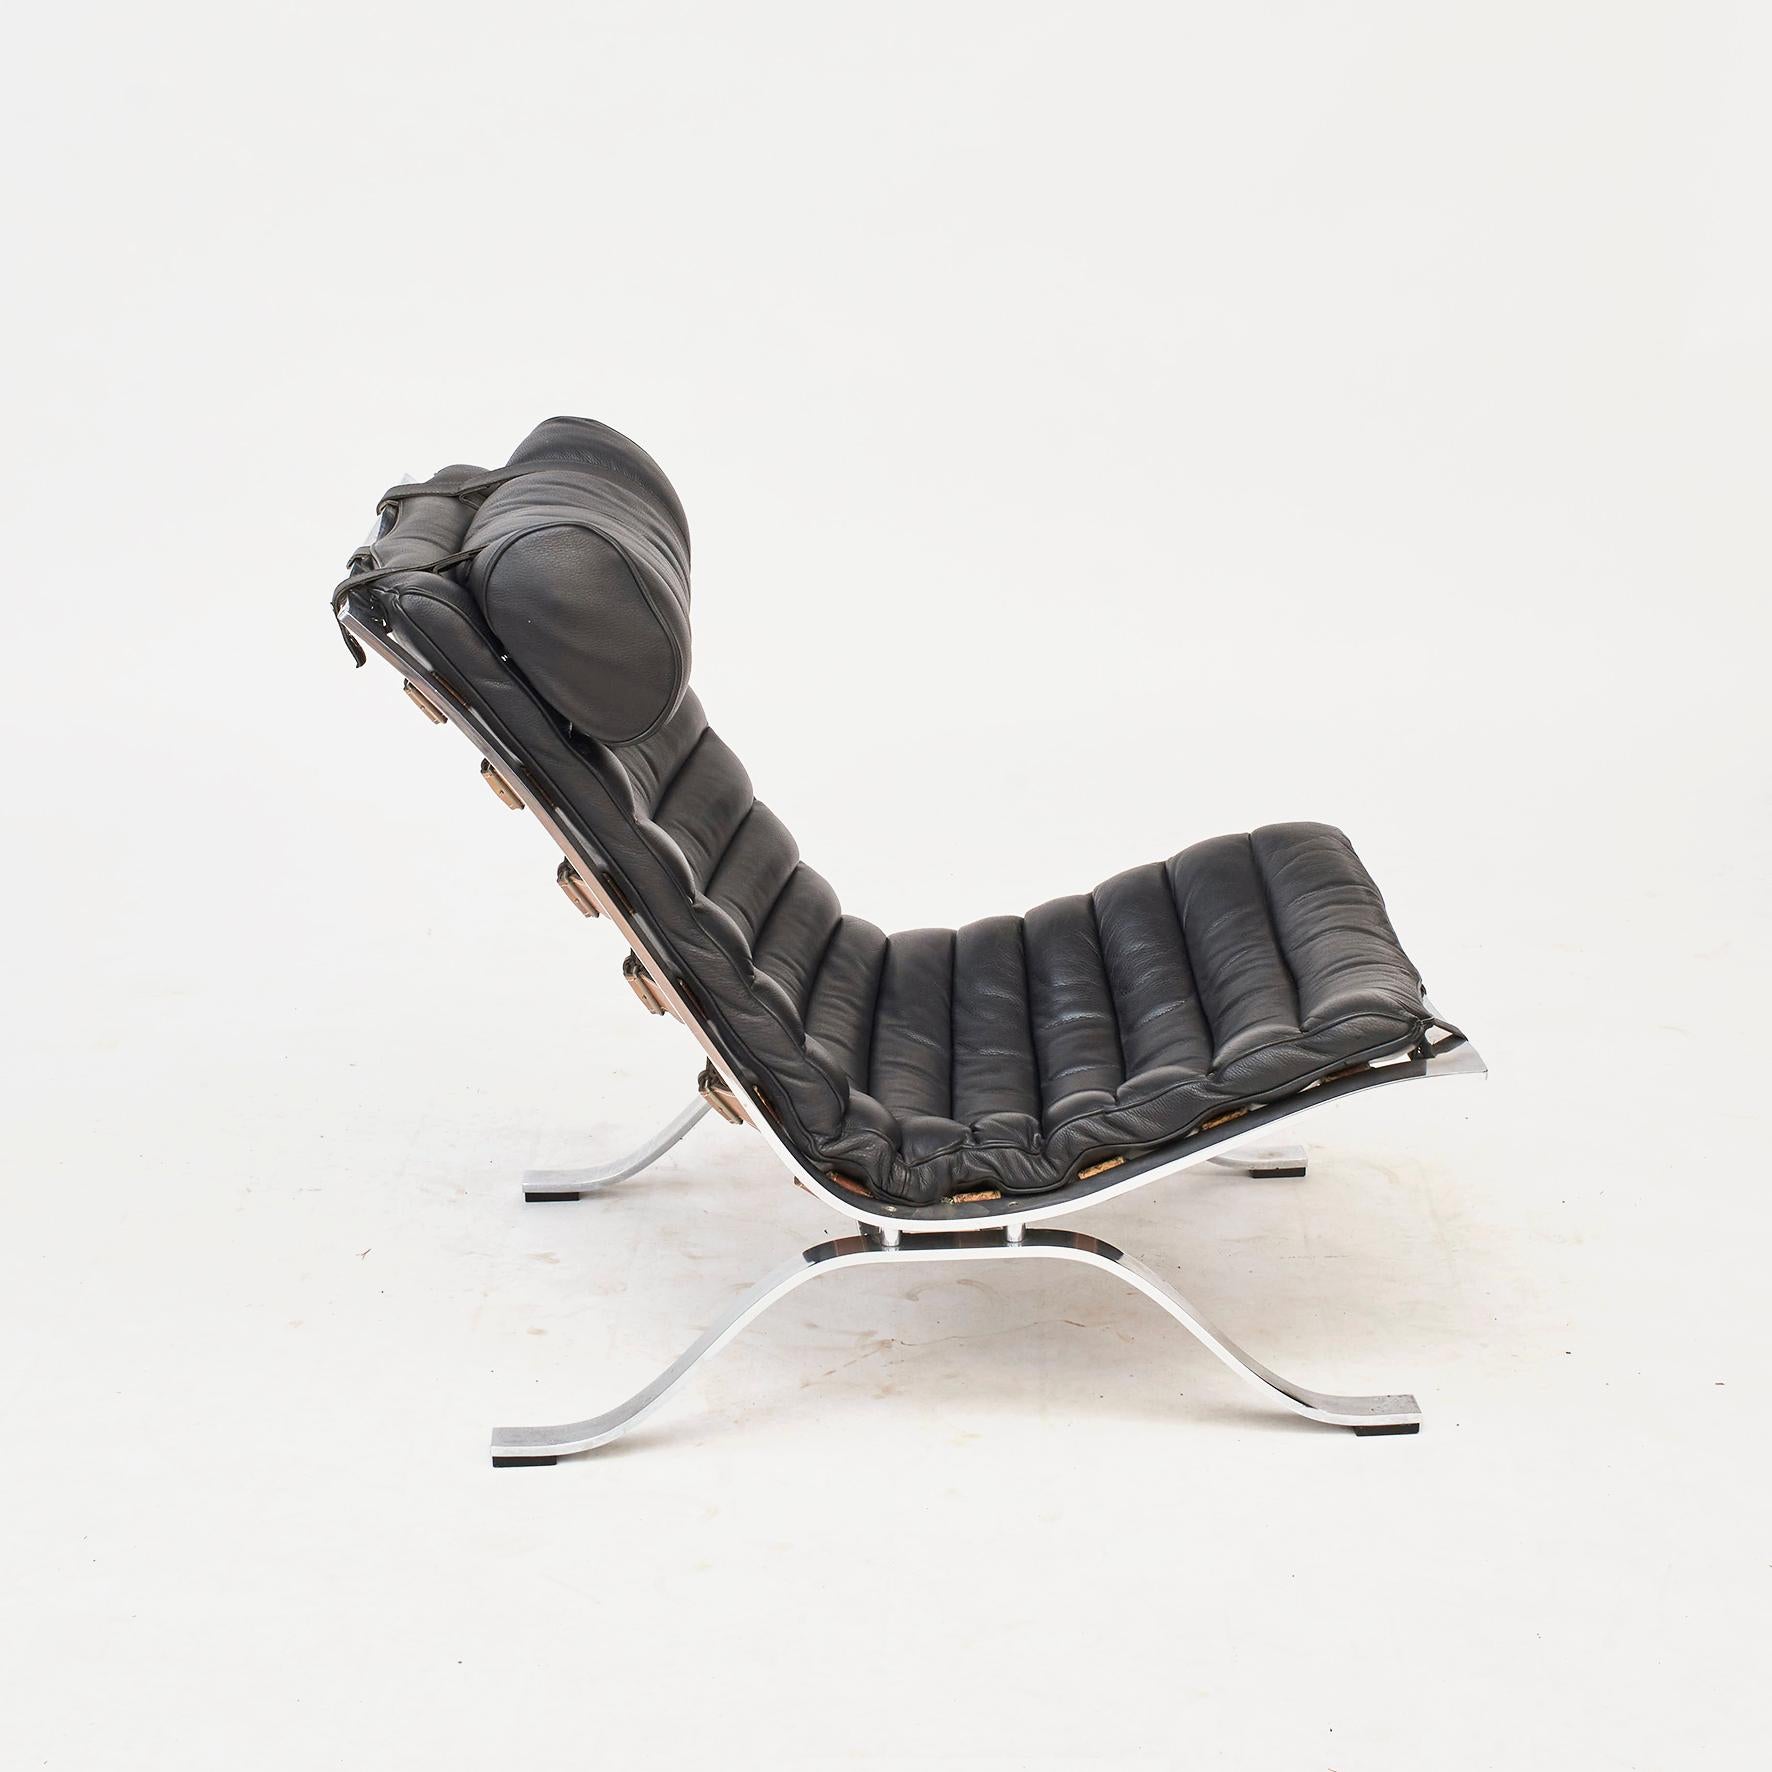 Arne Norell 1917-1971. 
Ari easy chairs designed and produced by Arne Norell in Solna, Sweden.
Made in chromed steel and black leather upholstery.

Designed in 1966.
This is from the late 1960s.
The leather upholstery was renewed approx. 10 yeas